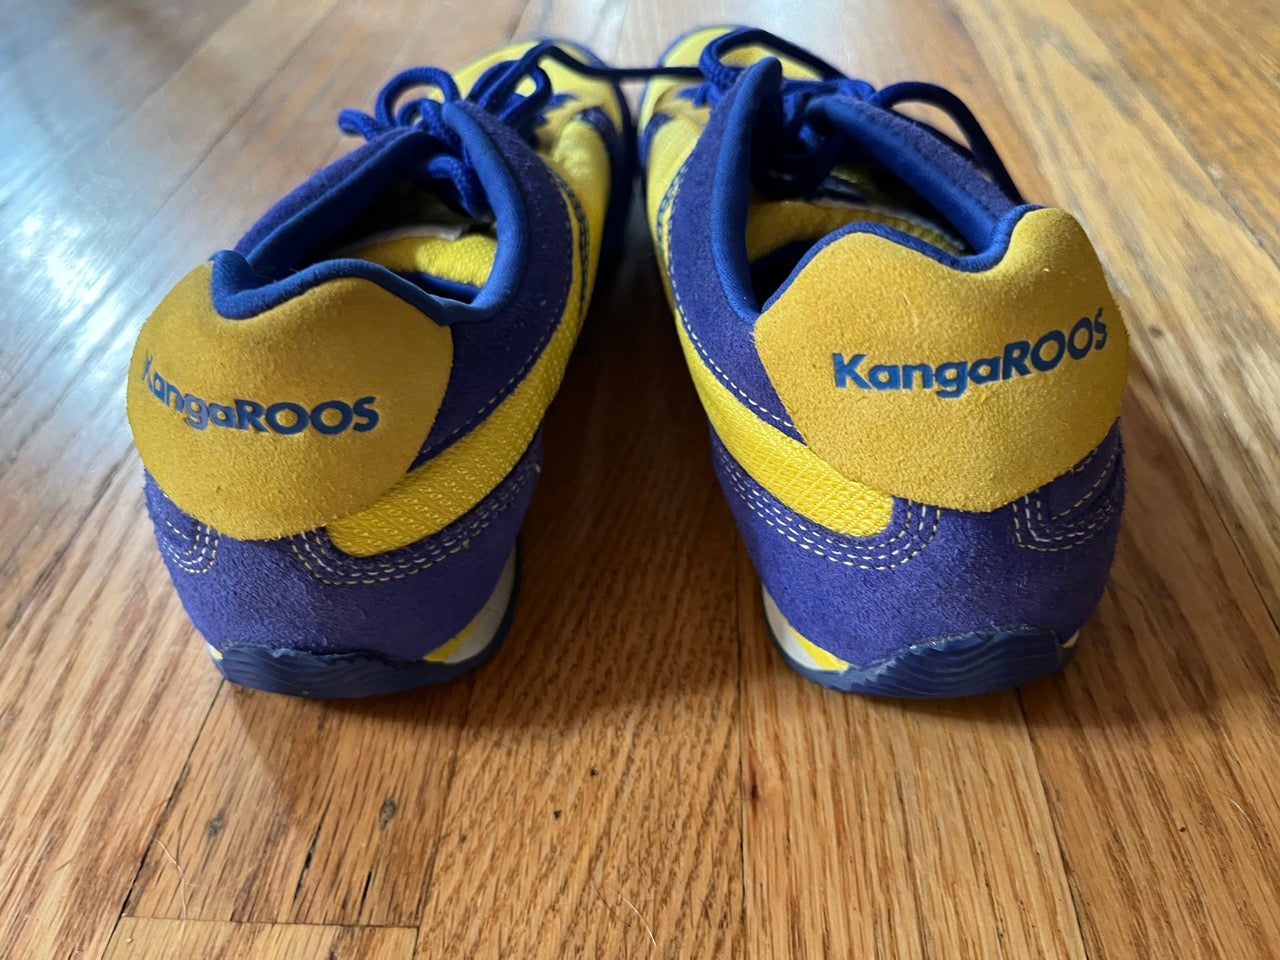 Forhåbentlig tack operation Vintage 80s/90s Yellow And Blue Kangaroos Sneakers With Pockets By Kangaroos  | Shop THRILLING